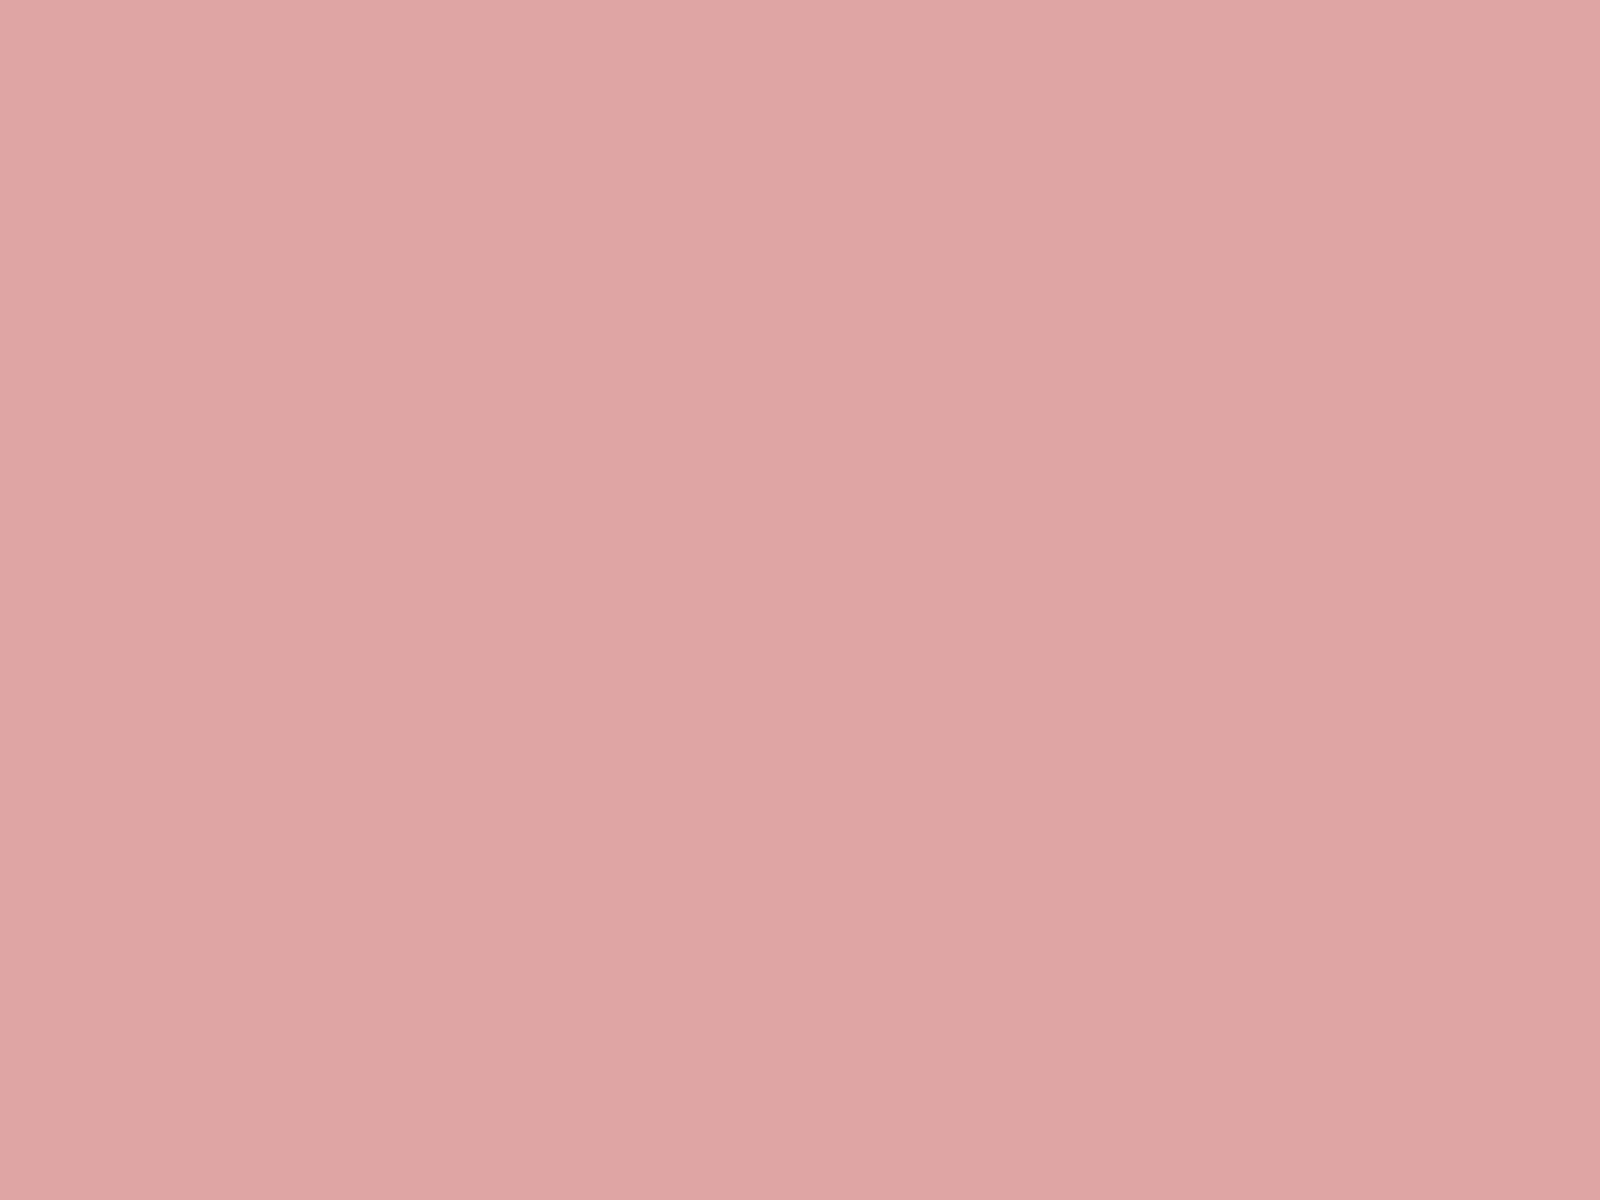 1600x1200 Pastel Pink Solid Color Background